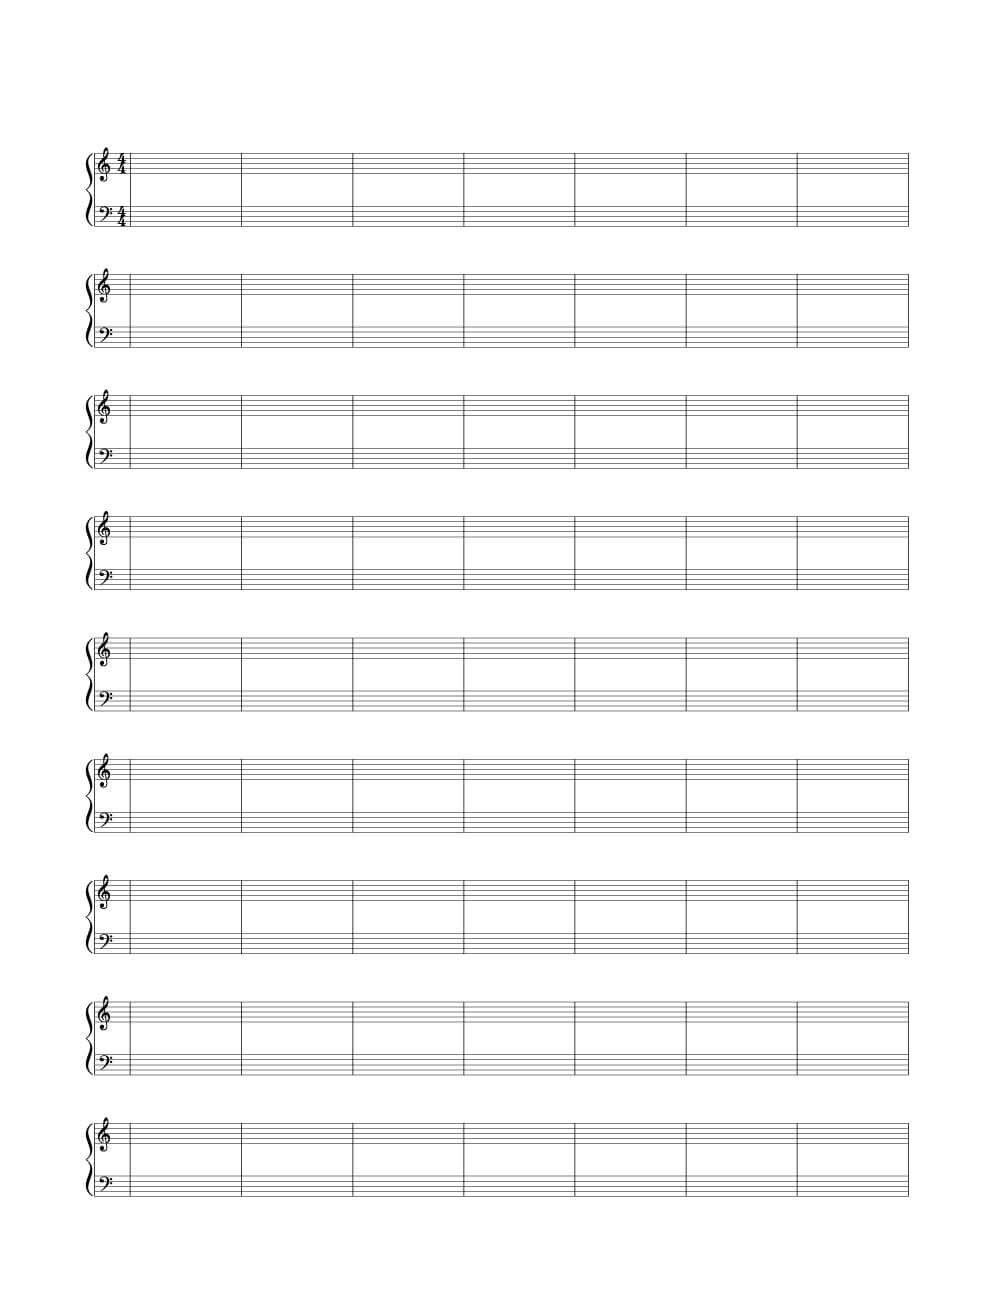 4/4 Time Signature Double Bar Blank Sheet Music | Woo! Jr Throughout Blank Sheet Music Template For Word